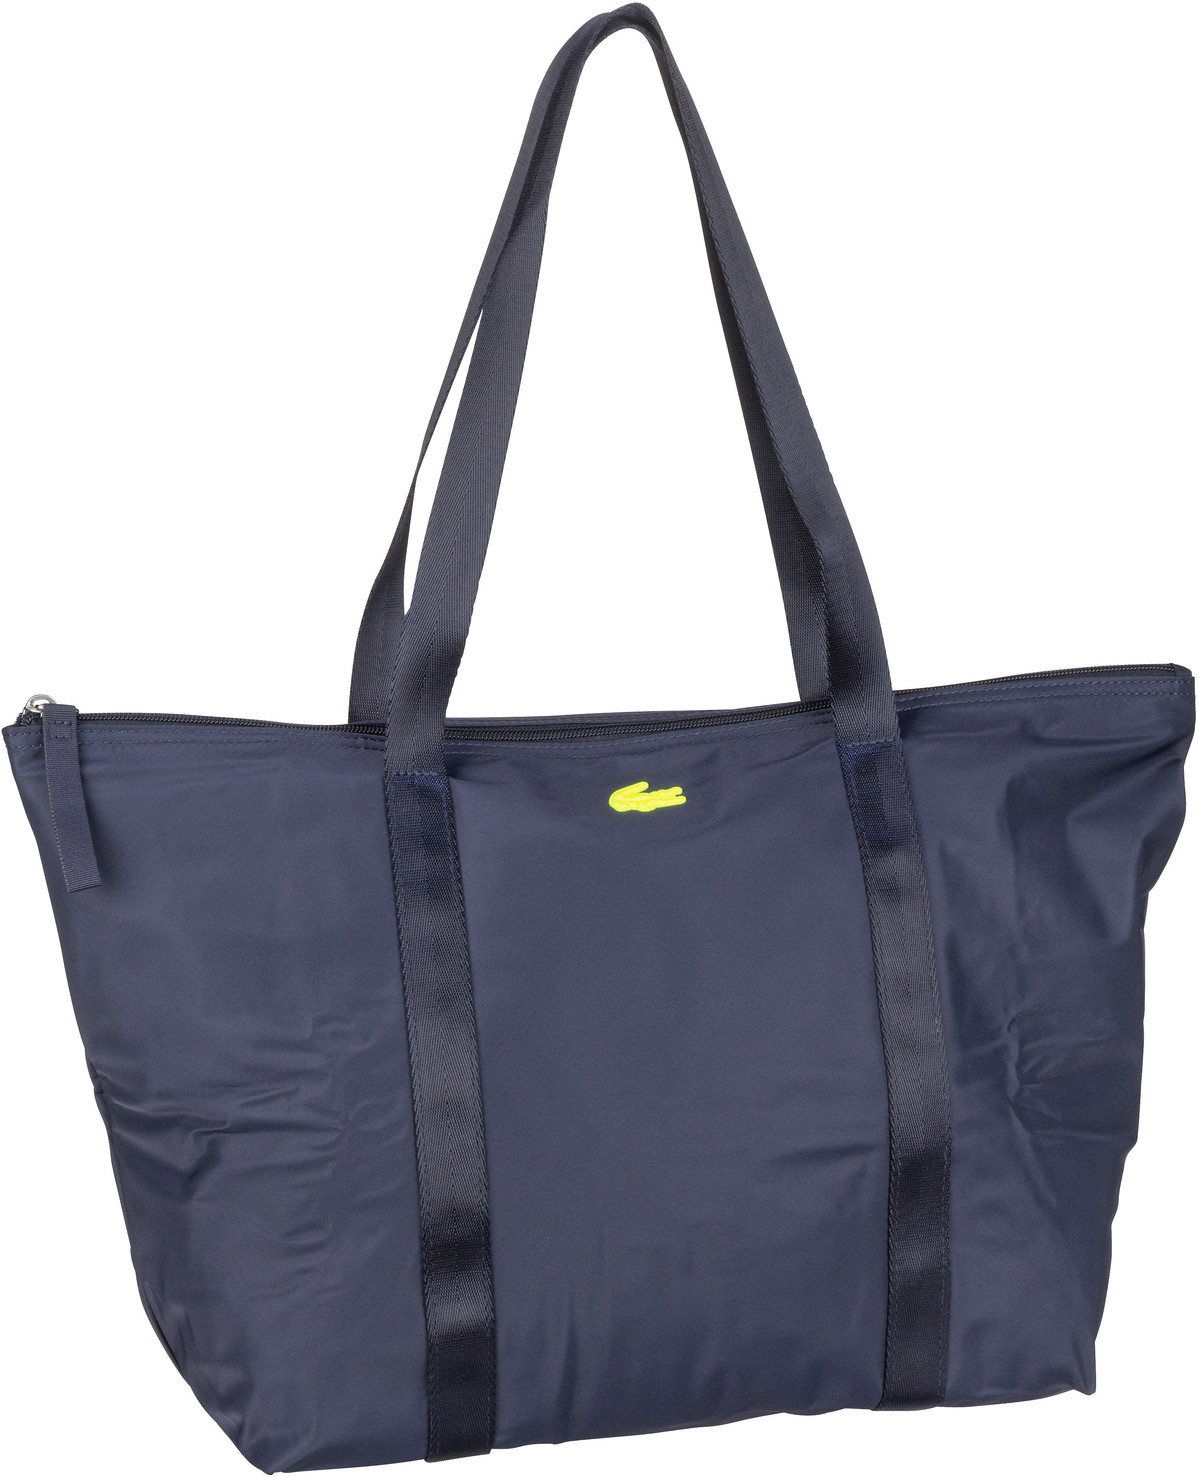 Lacoste Jeanne Shopping Bag L 3618 - Marine/Neon Yellow